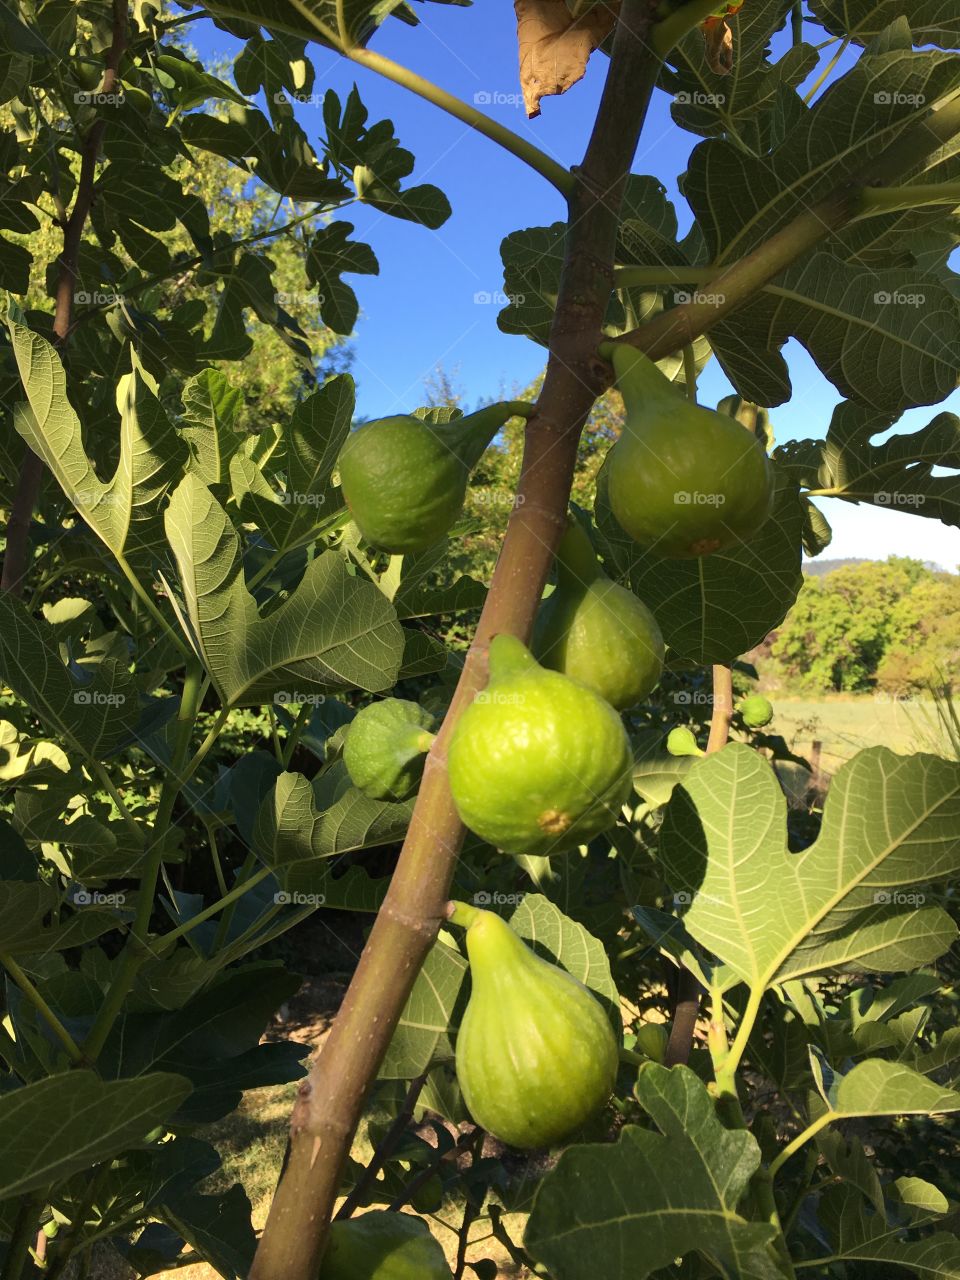 Green Figs in the morning sun light.